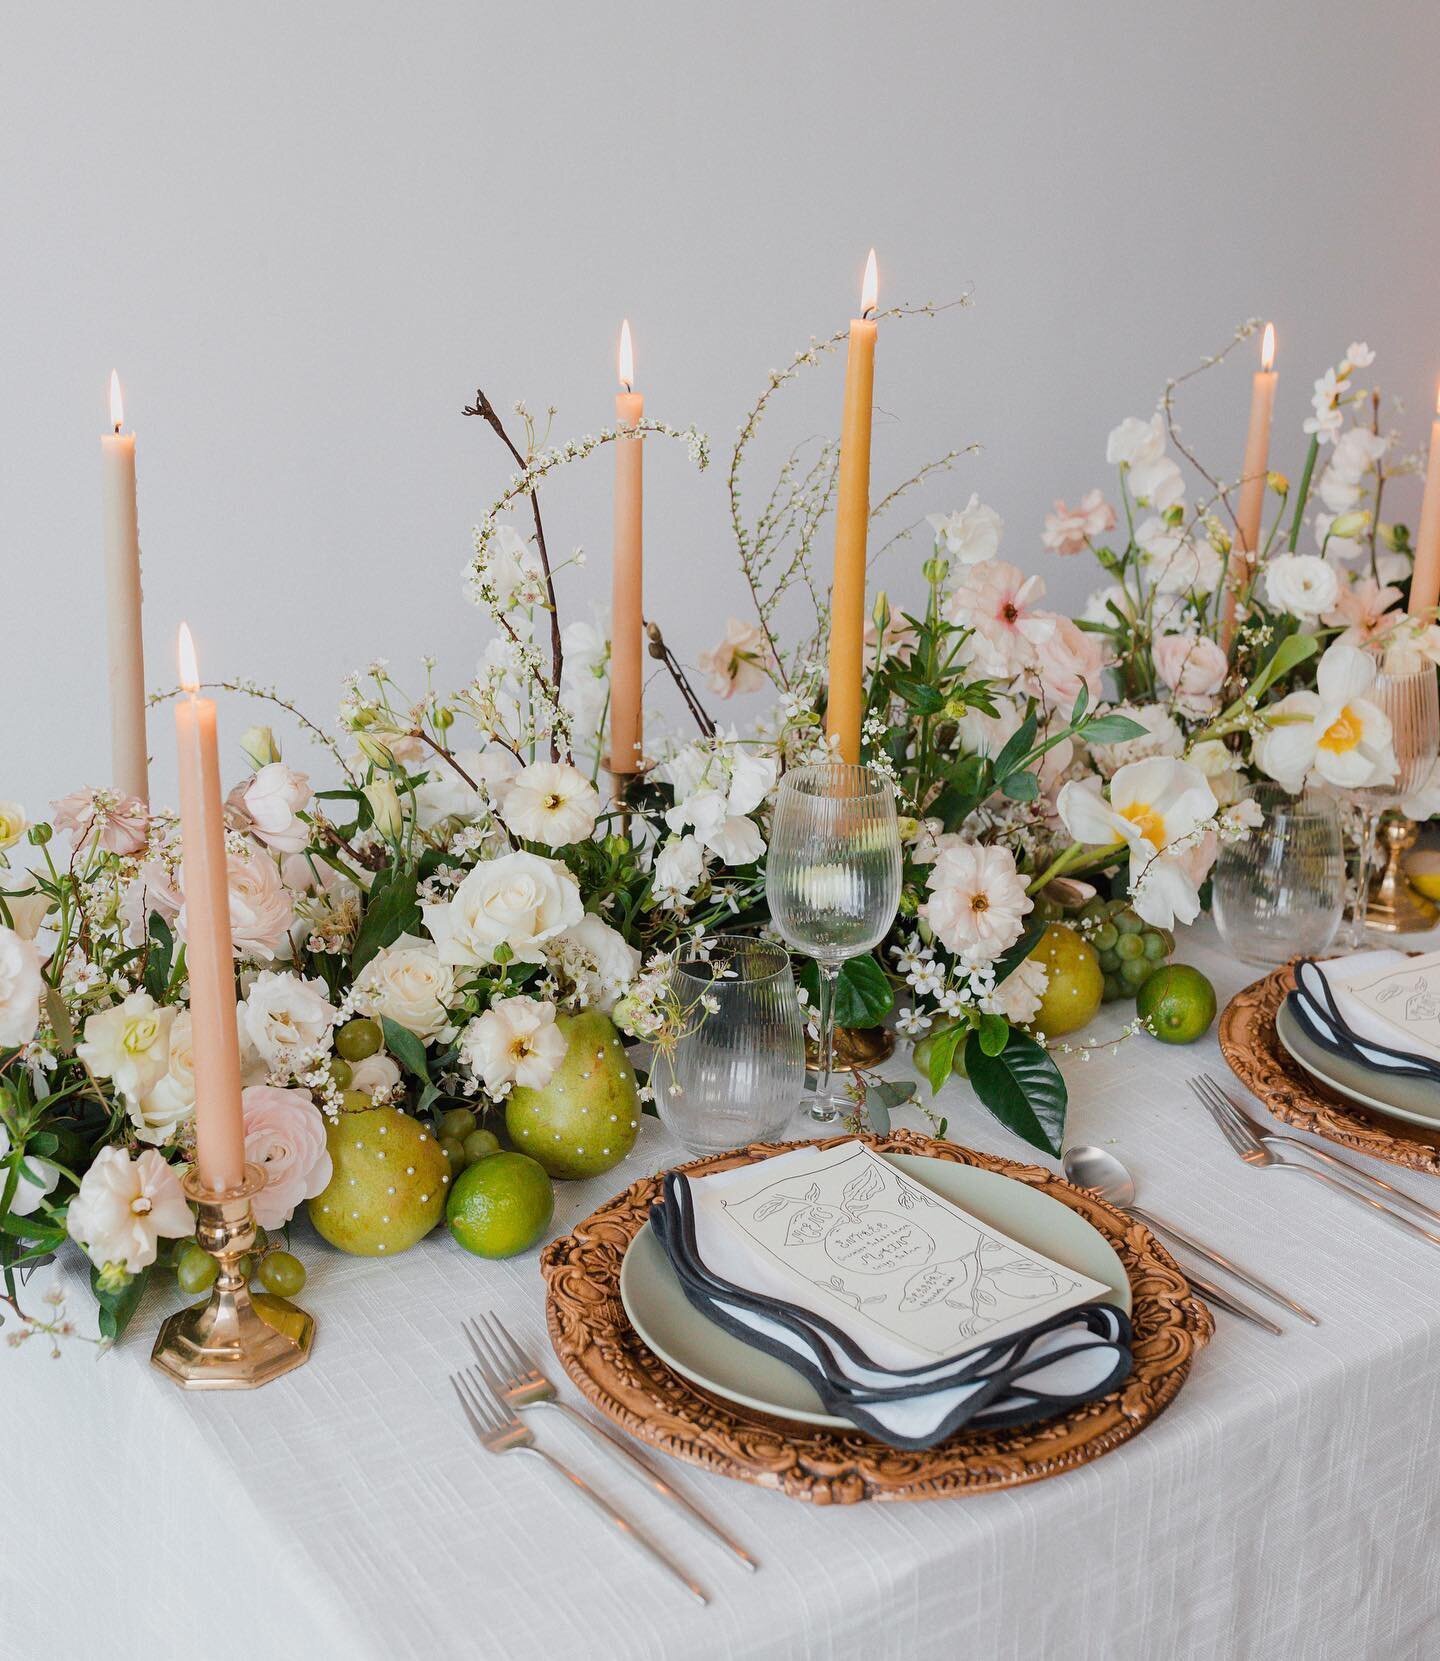 wedding trend: incorporating fruit into your tablescape 🍐what are your thoughts?!

featuring hazel ribbed glassware, vera pressed wood charger, arlo sage dinnerware, sky tapered flatware and wavy scalloped napkin

ALL AVAILABLE FOR RENT AT
www.table